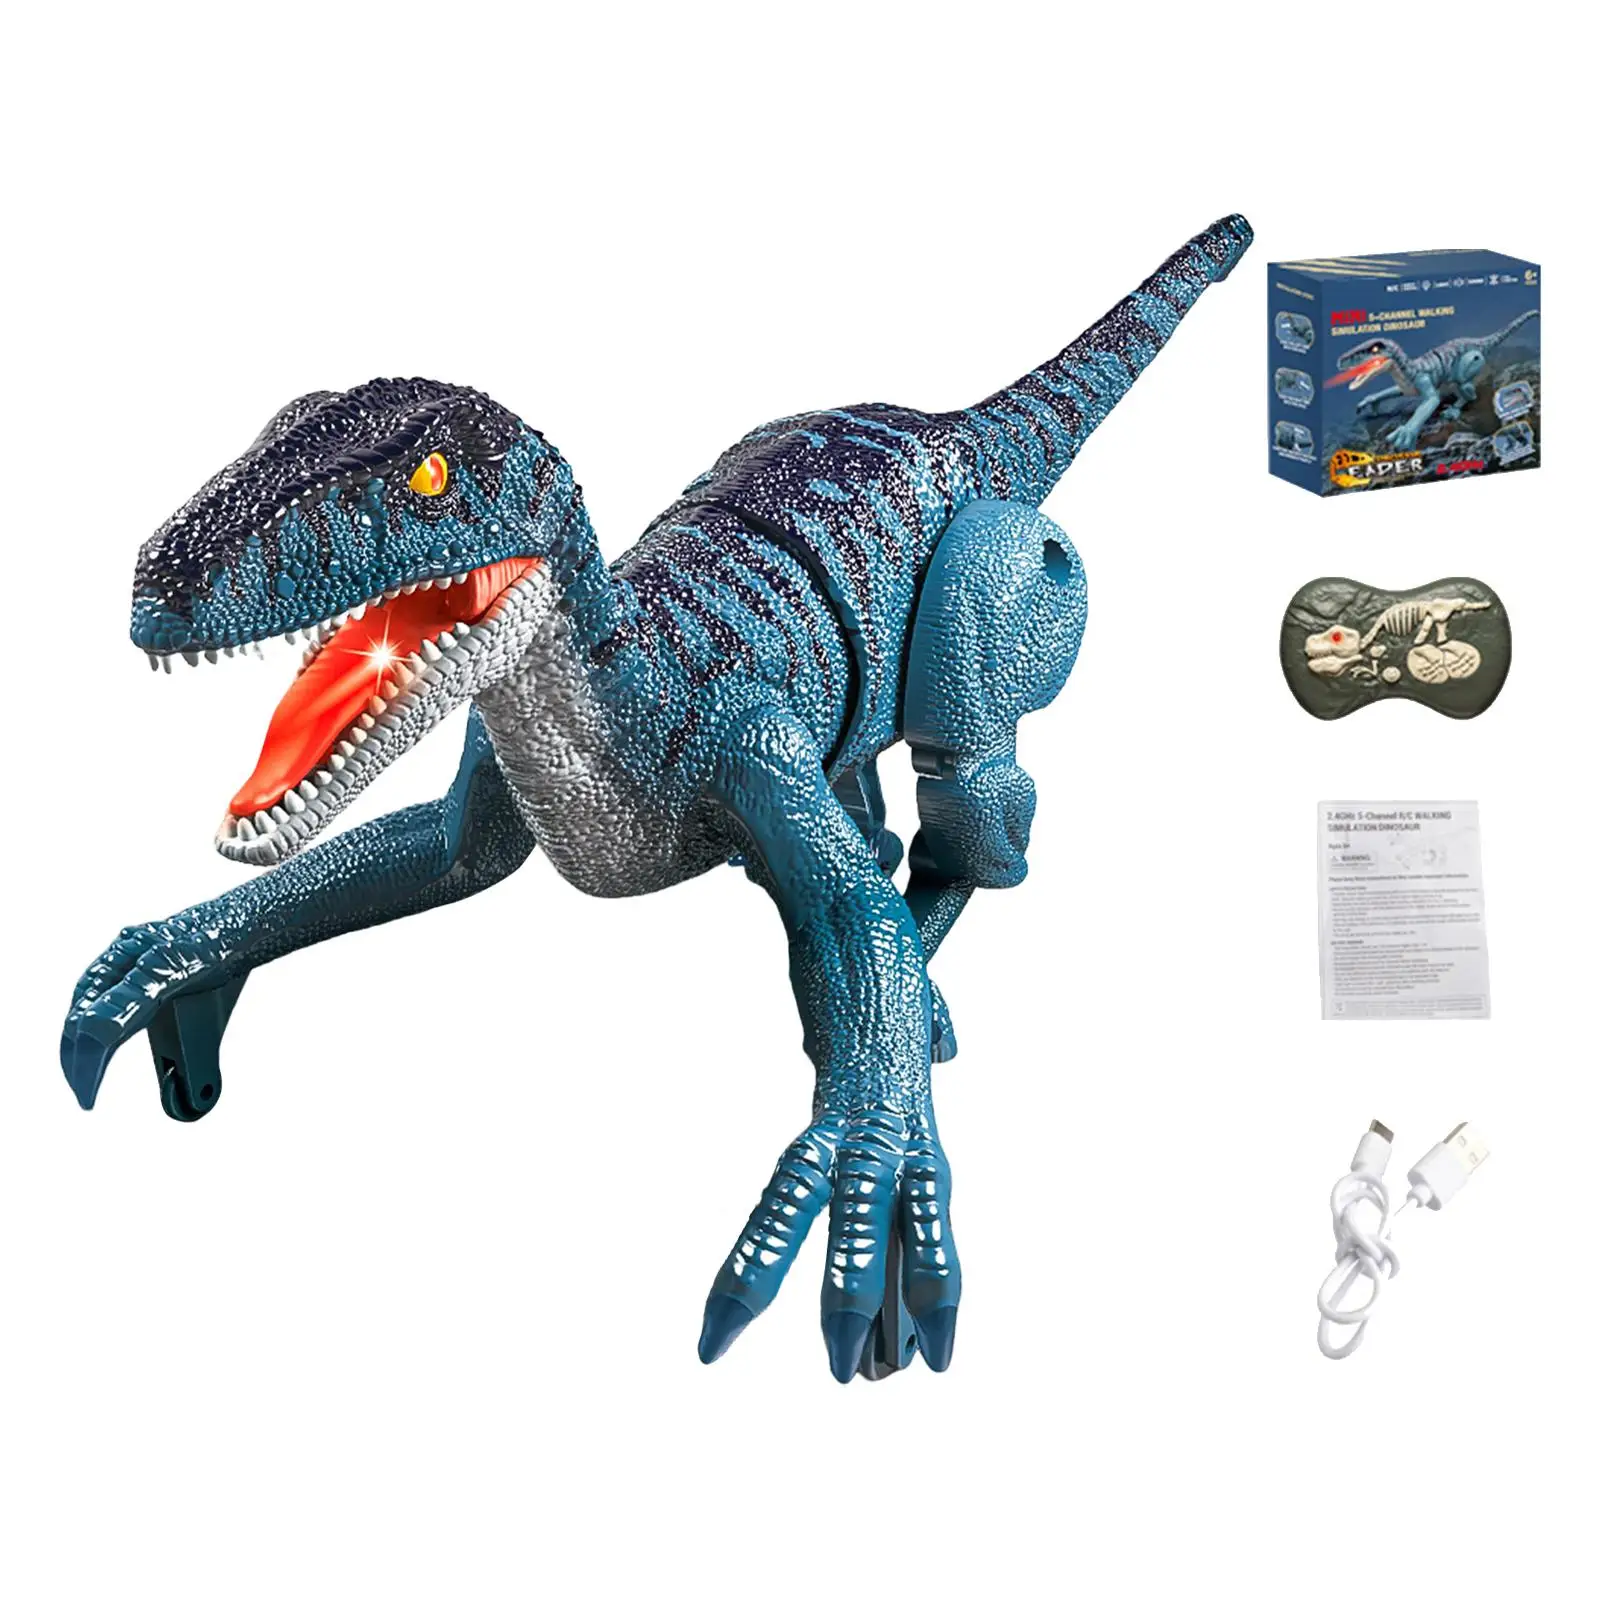 Electric Dinosaur Toys Realistic Play Dinosaur Toy for Toddlers Girls Kids